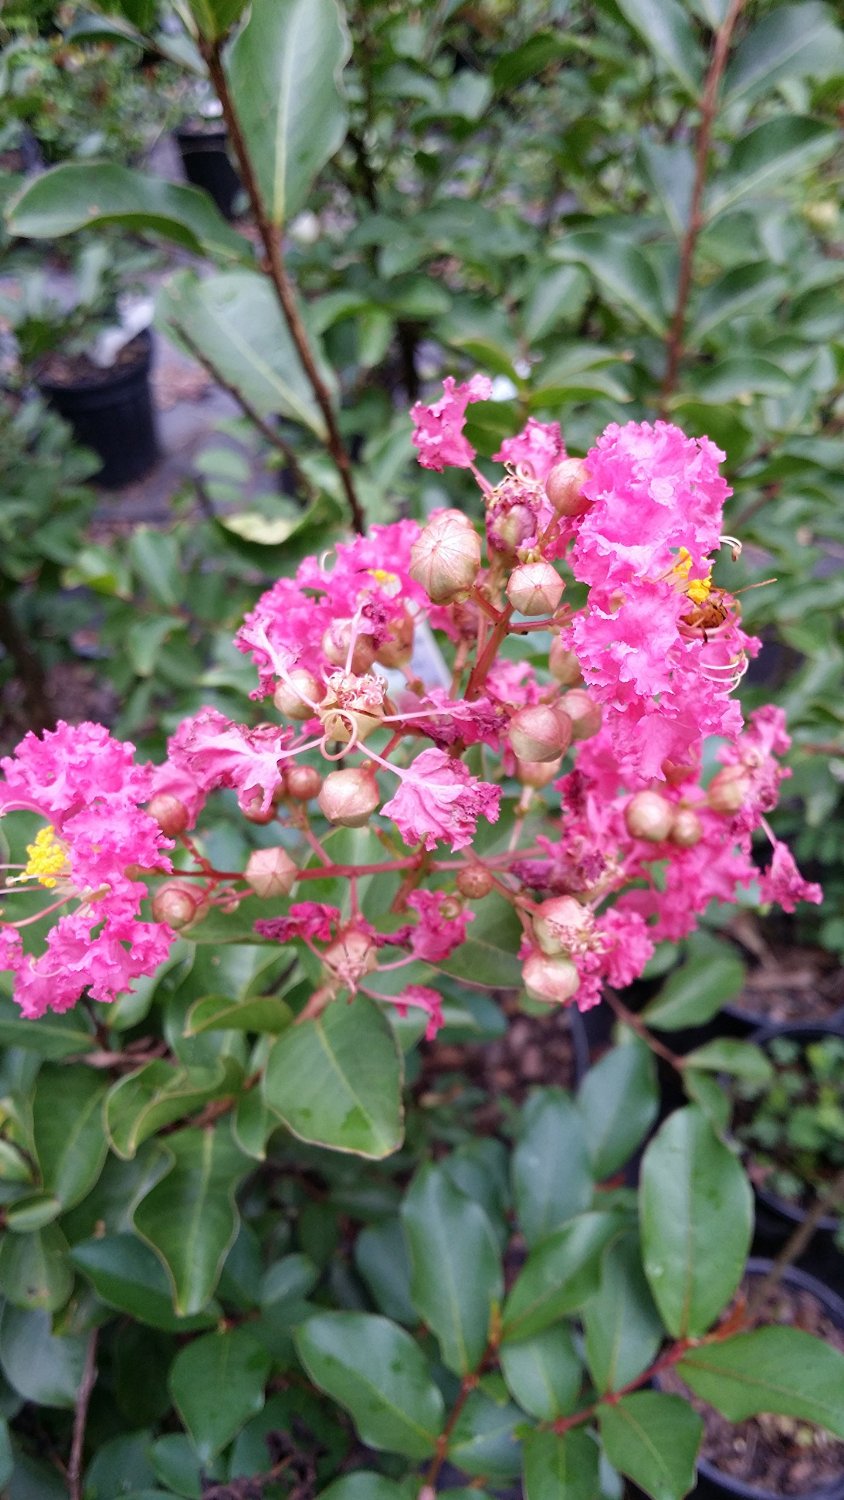 (1 Gallon) Sweetheart Dazzle® Crape Myrtle, Stunning Dwarf, Compact Mounded Shrub, Gorgeous Pink Blooms From Summer To Fall